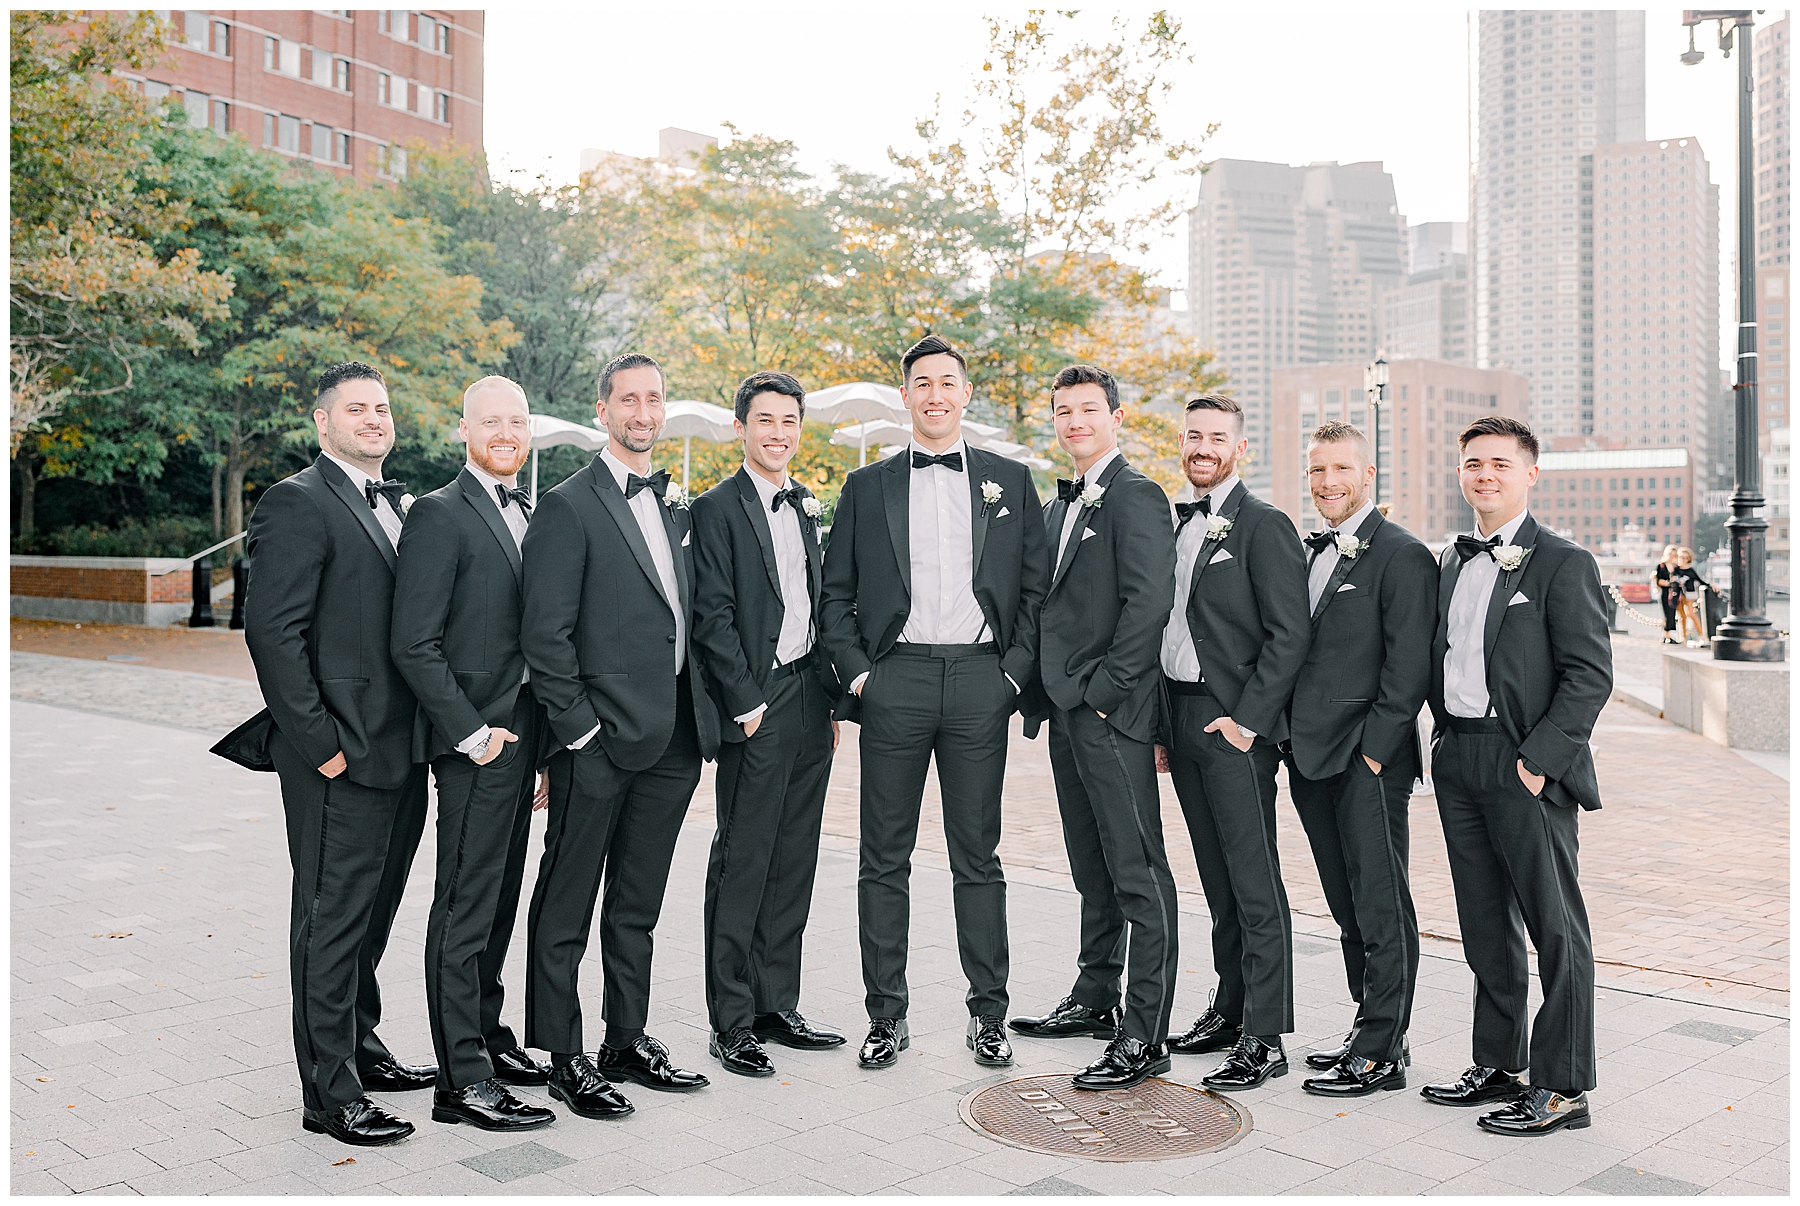 Groom and Groomsmen stand together after wedding ceremony